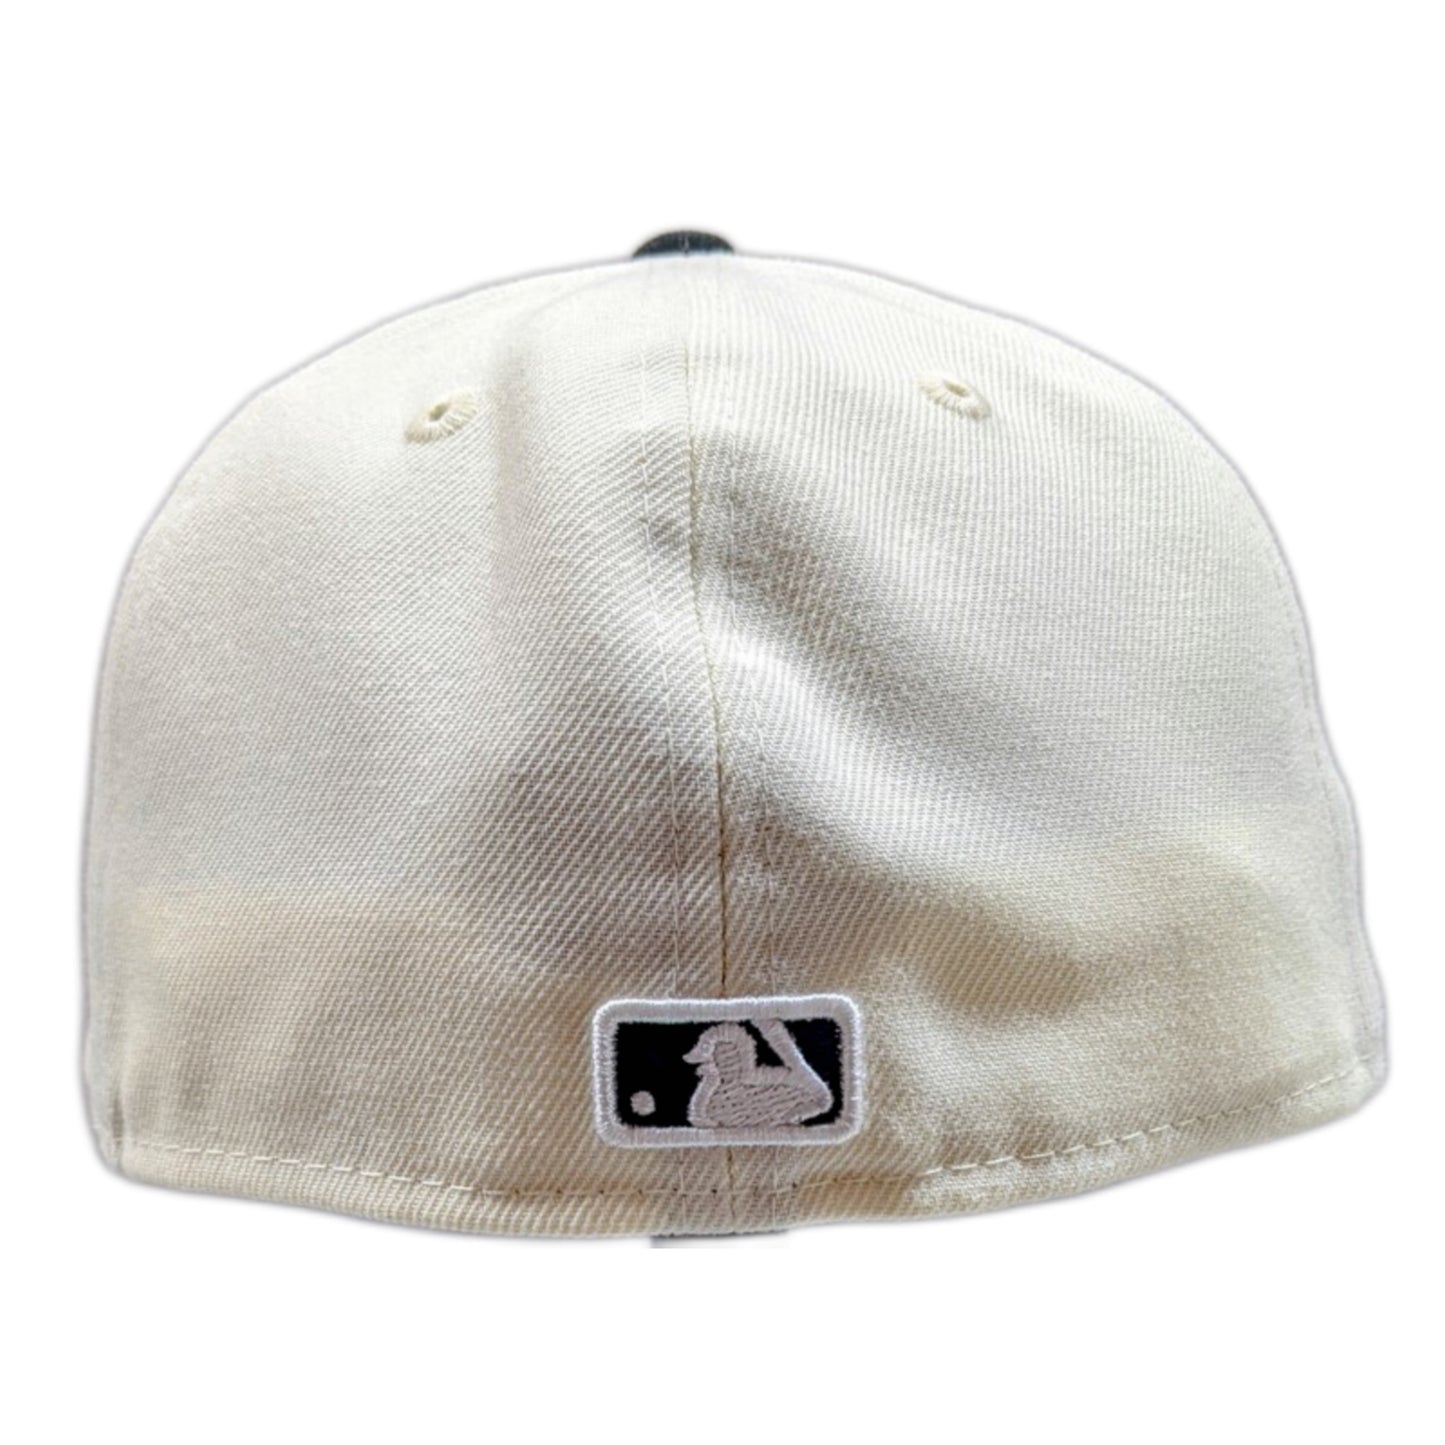 Chicago White Sox 2 Tone Off White and Black New Era Batterman 59FIFTY Fitted Hat